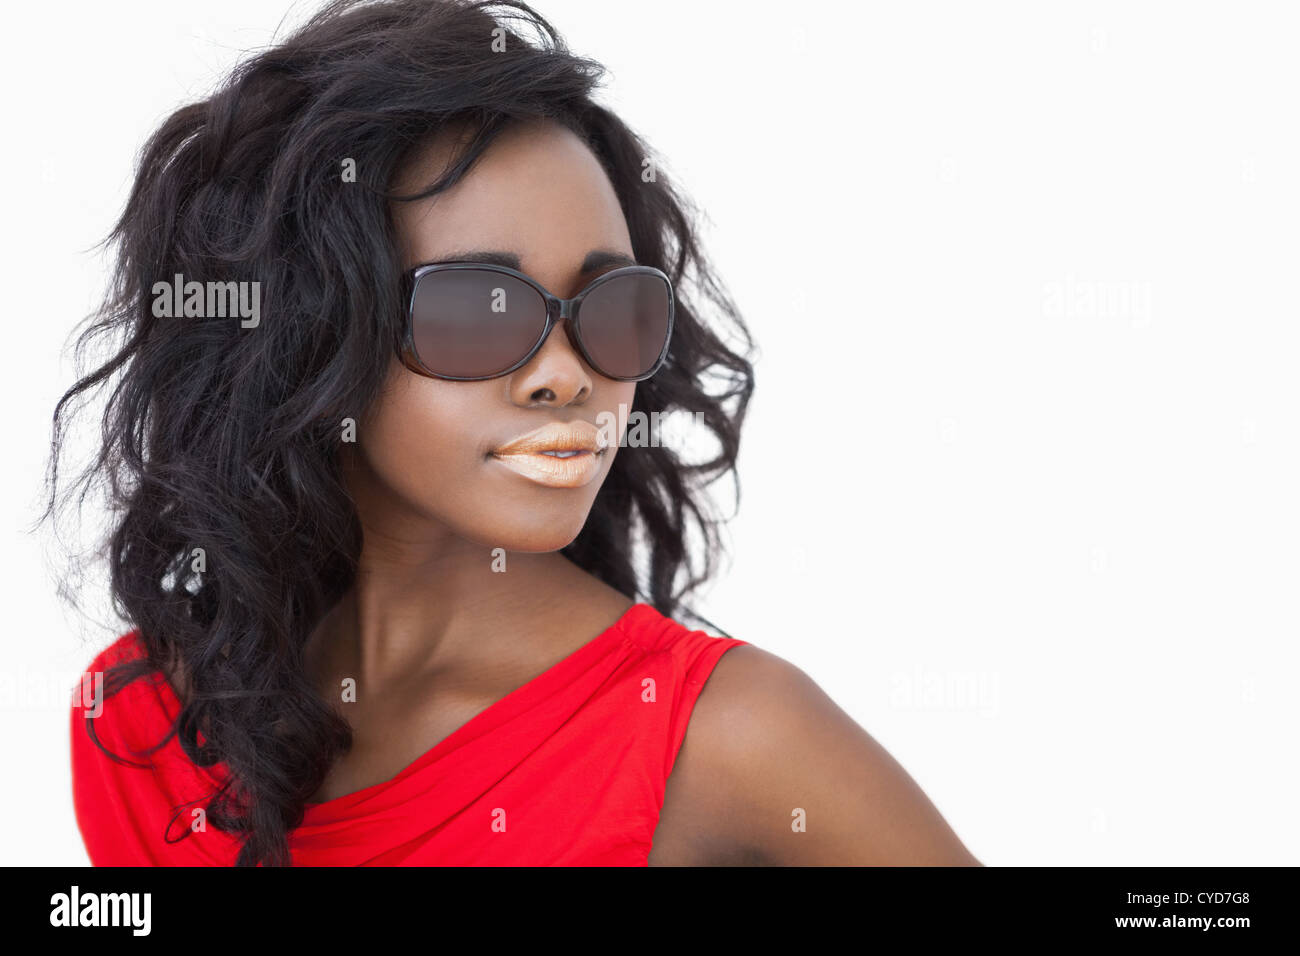 Woman wearing sunglasses and a red dress Stock Photo